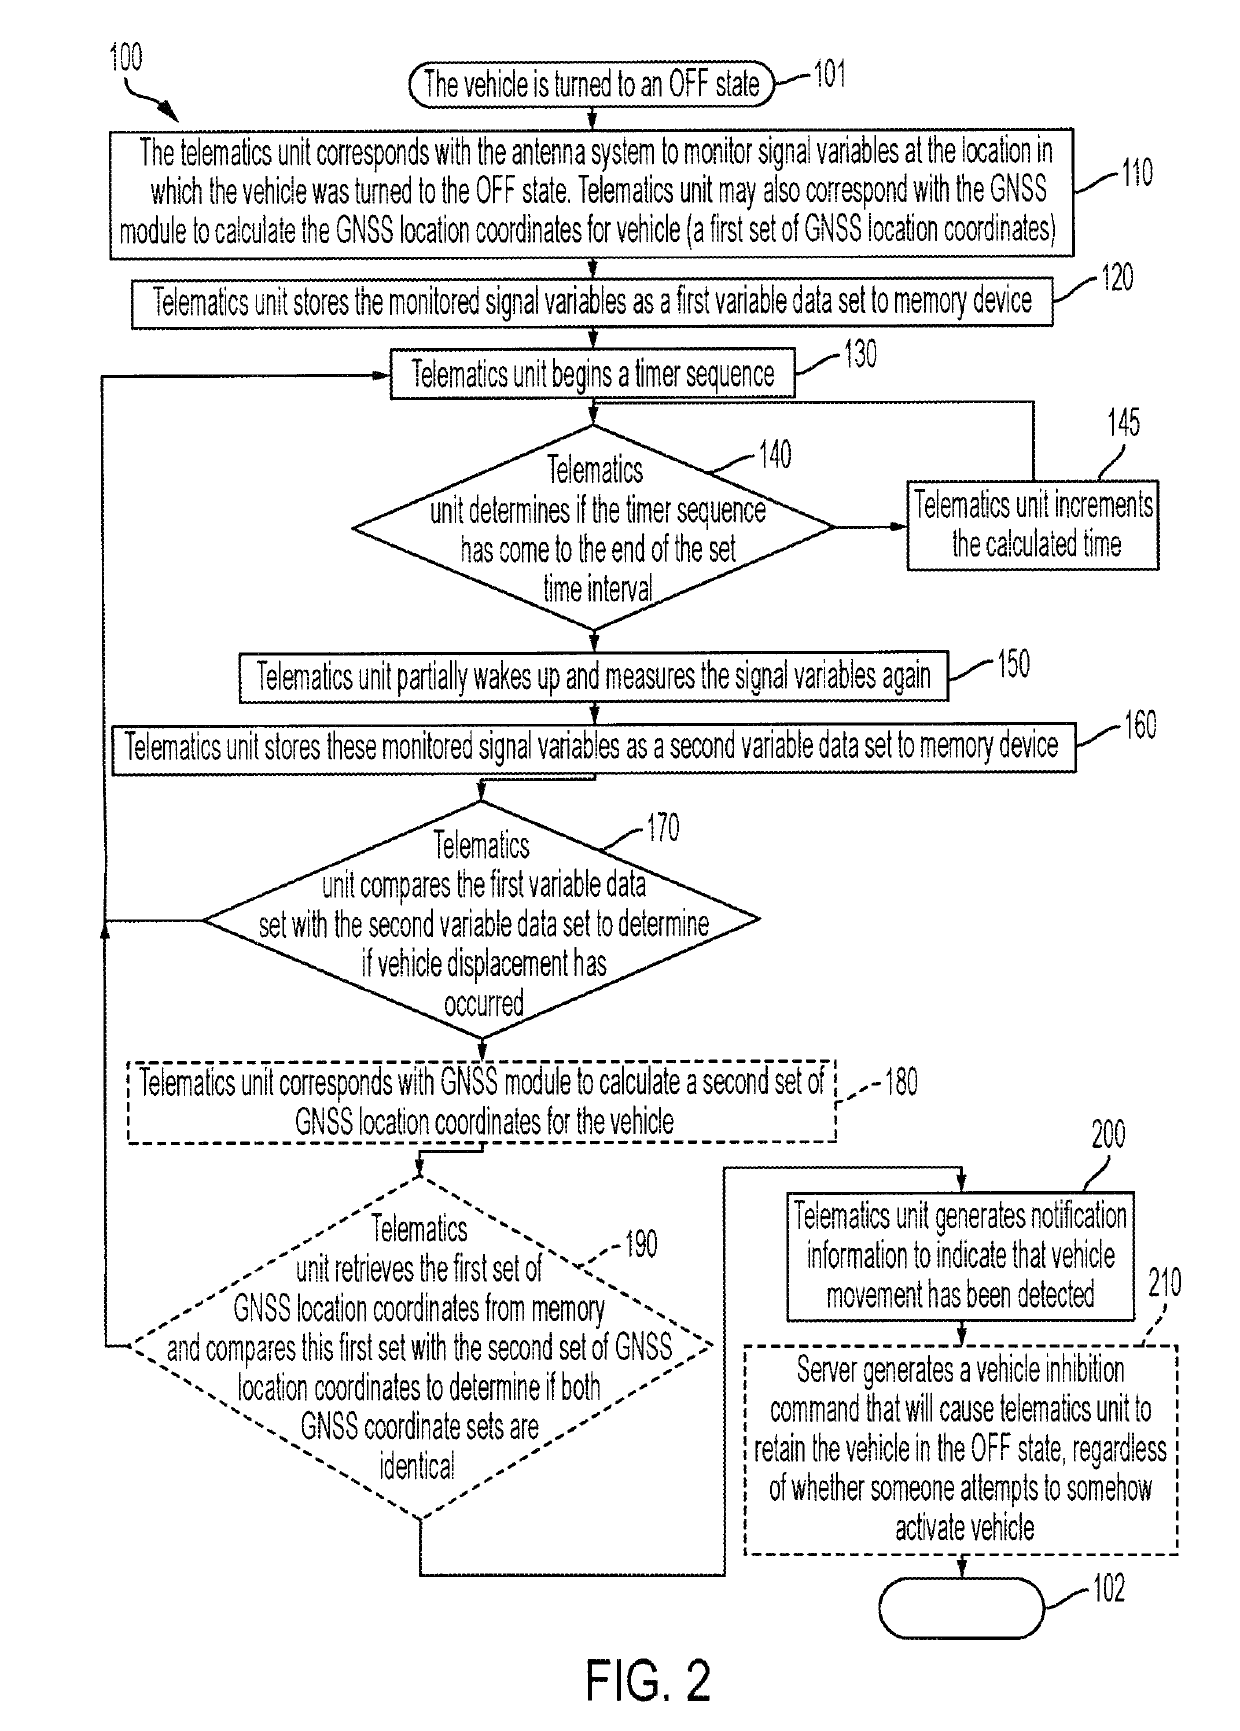 System and method to detect vehicle movement